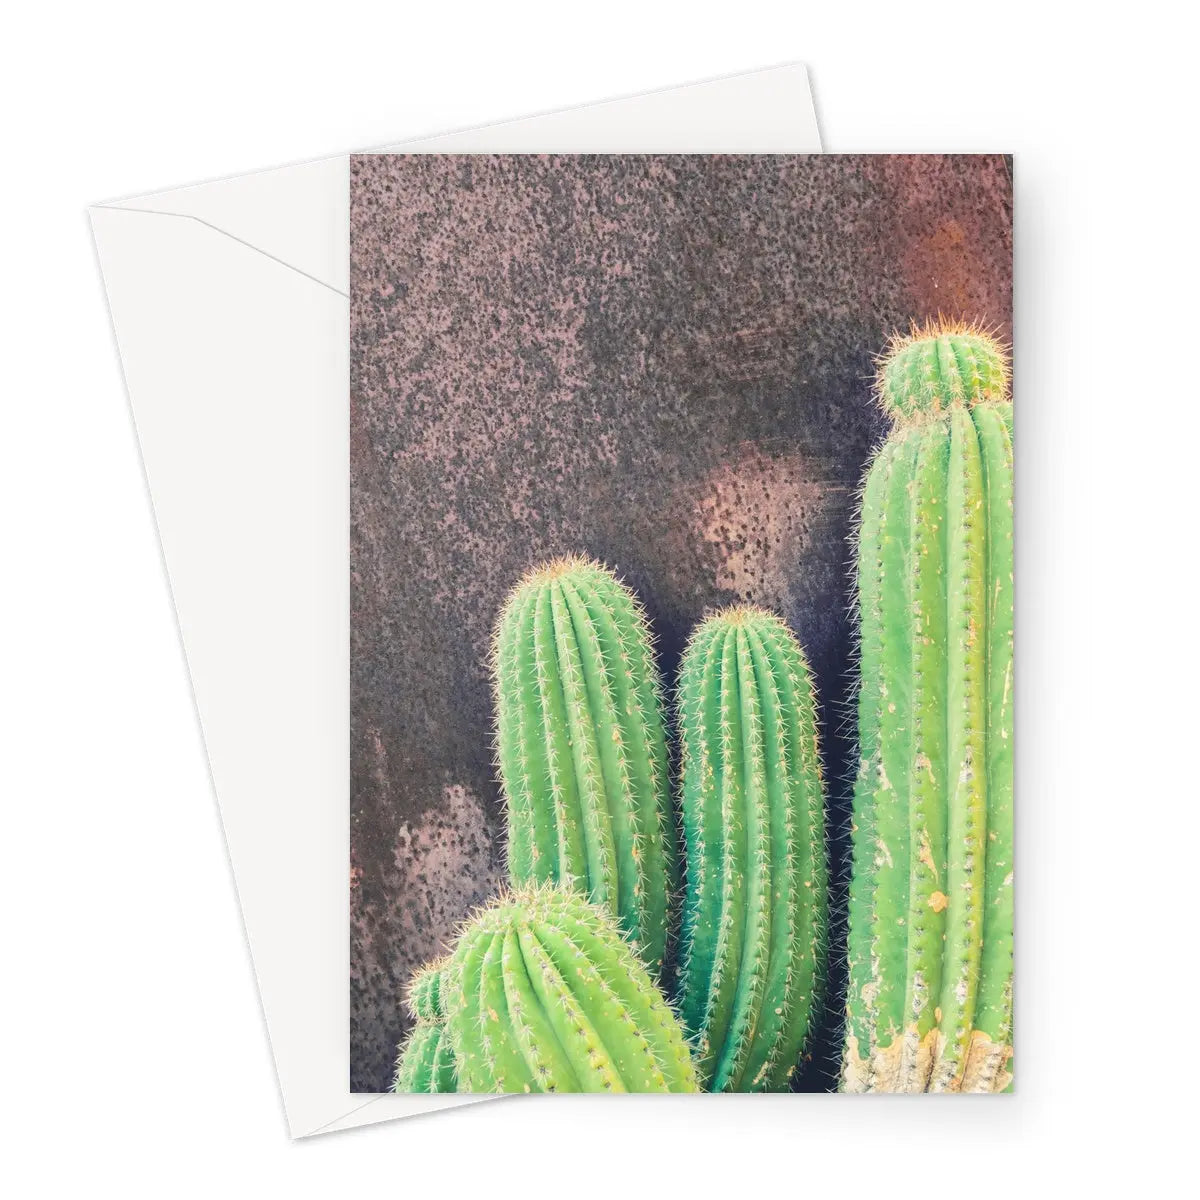 Family Affair Greeting Card - A5 Portrait / 1 Card - Greeting & Note Cards - Aesthetic Art